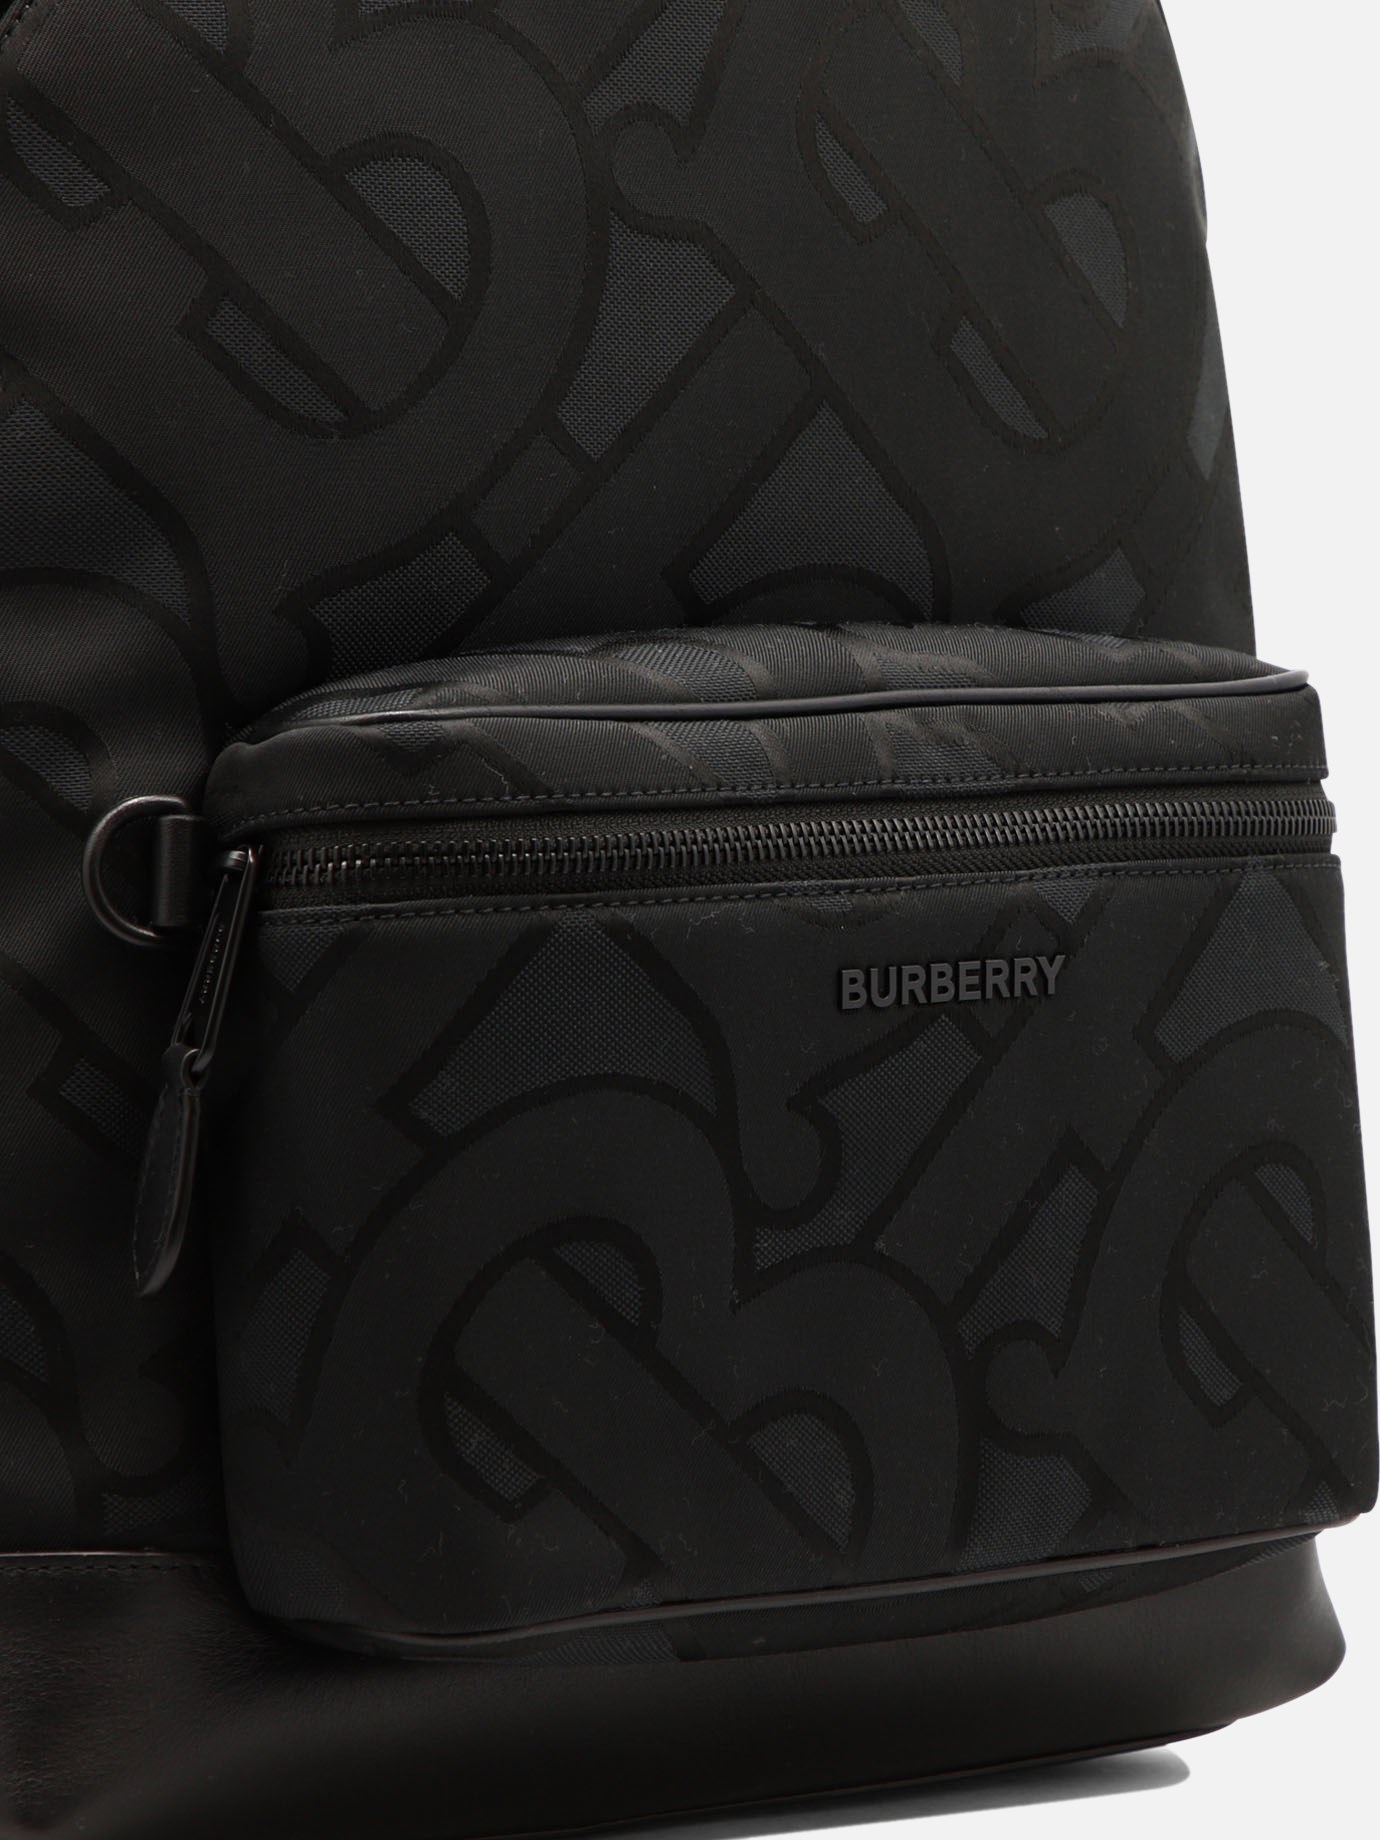 Backpack with monogram by Burberry